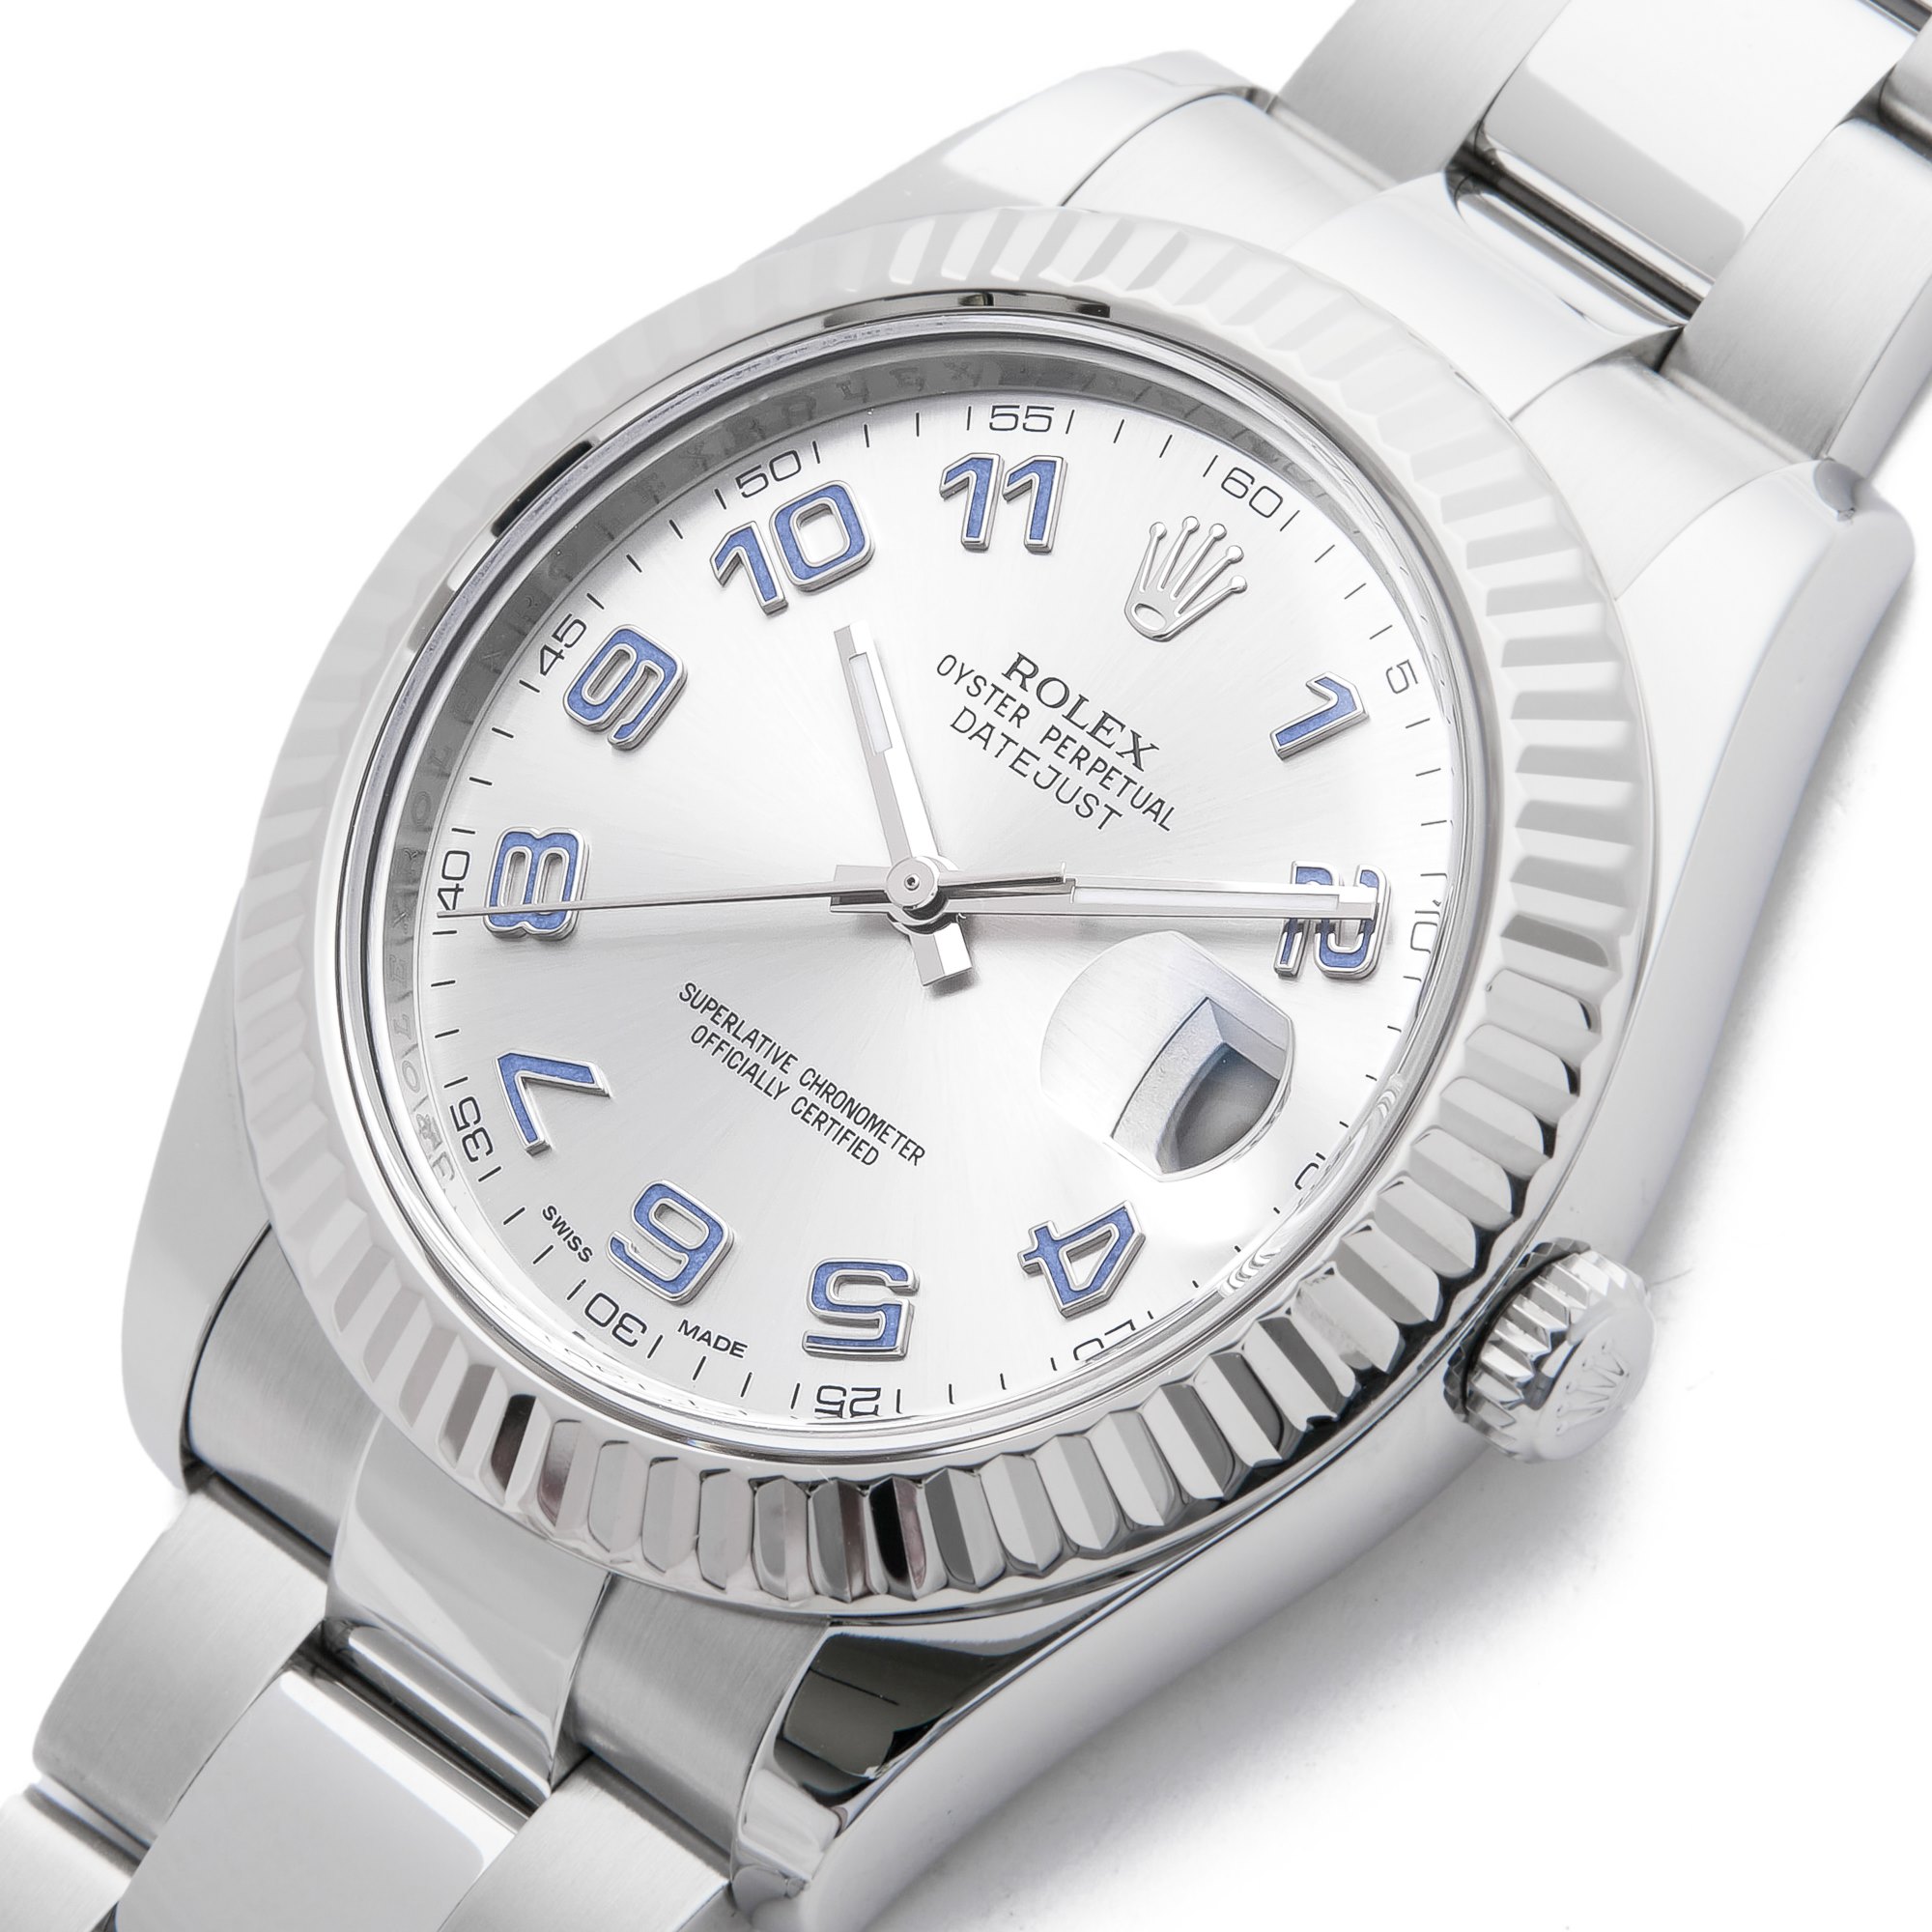 Rolex Datejust 41 White Gold & Stainless Steel 116334